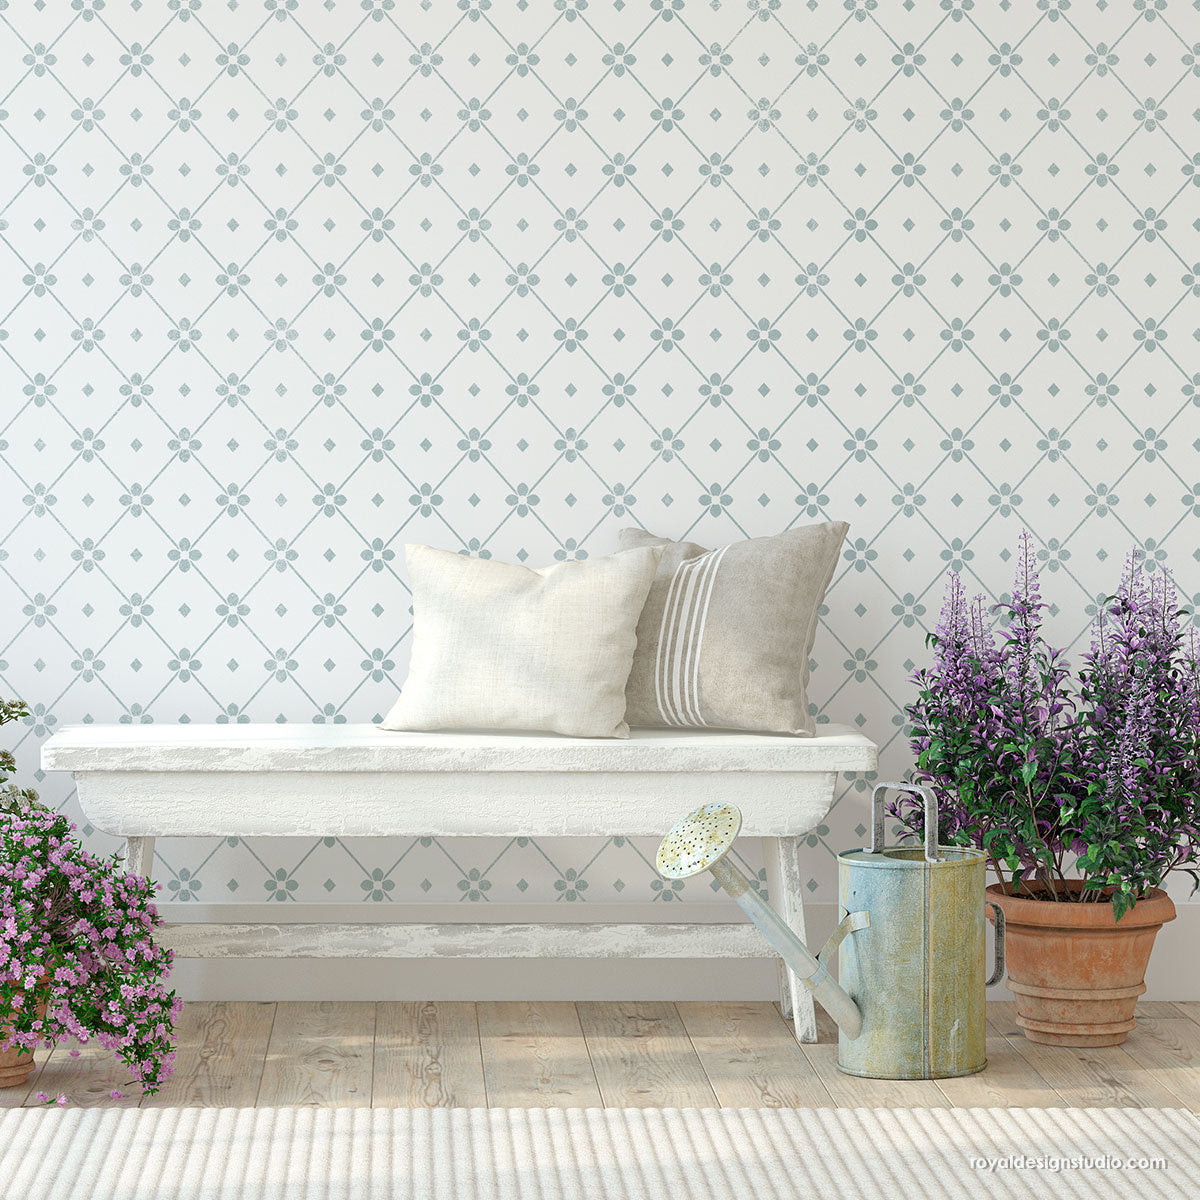 French country floral trellis wall stencils for stenciling walls